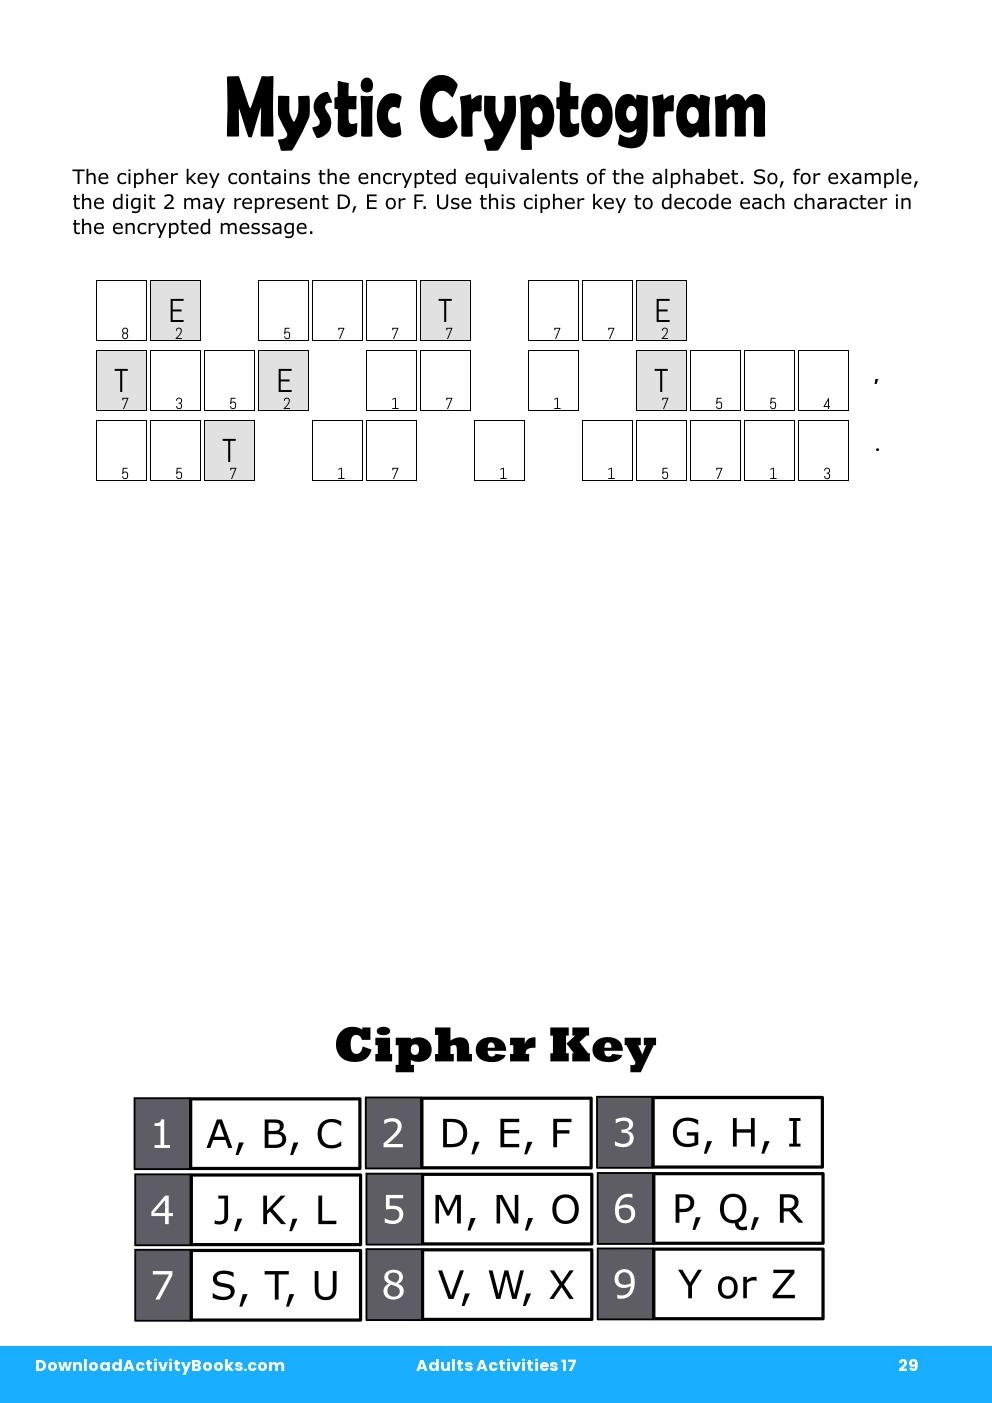 Mystic Cryptogram in Adults Activities 17